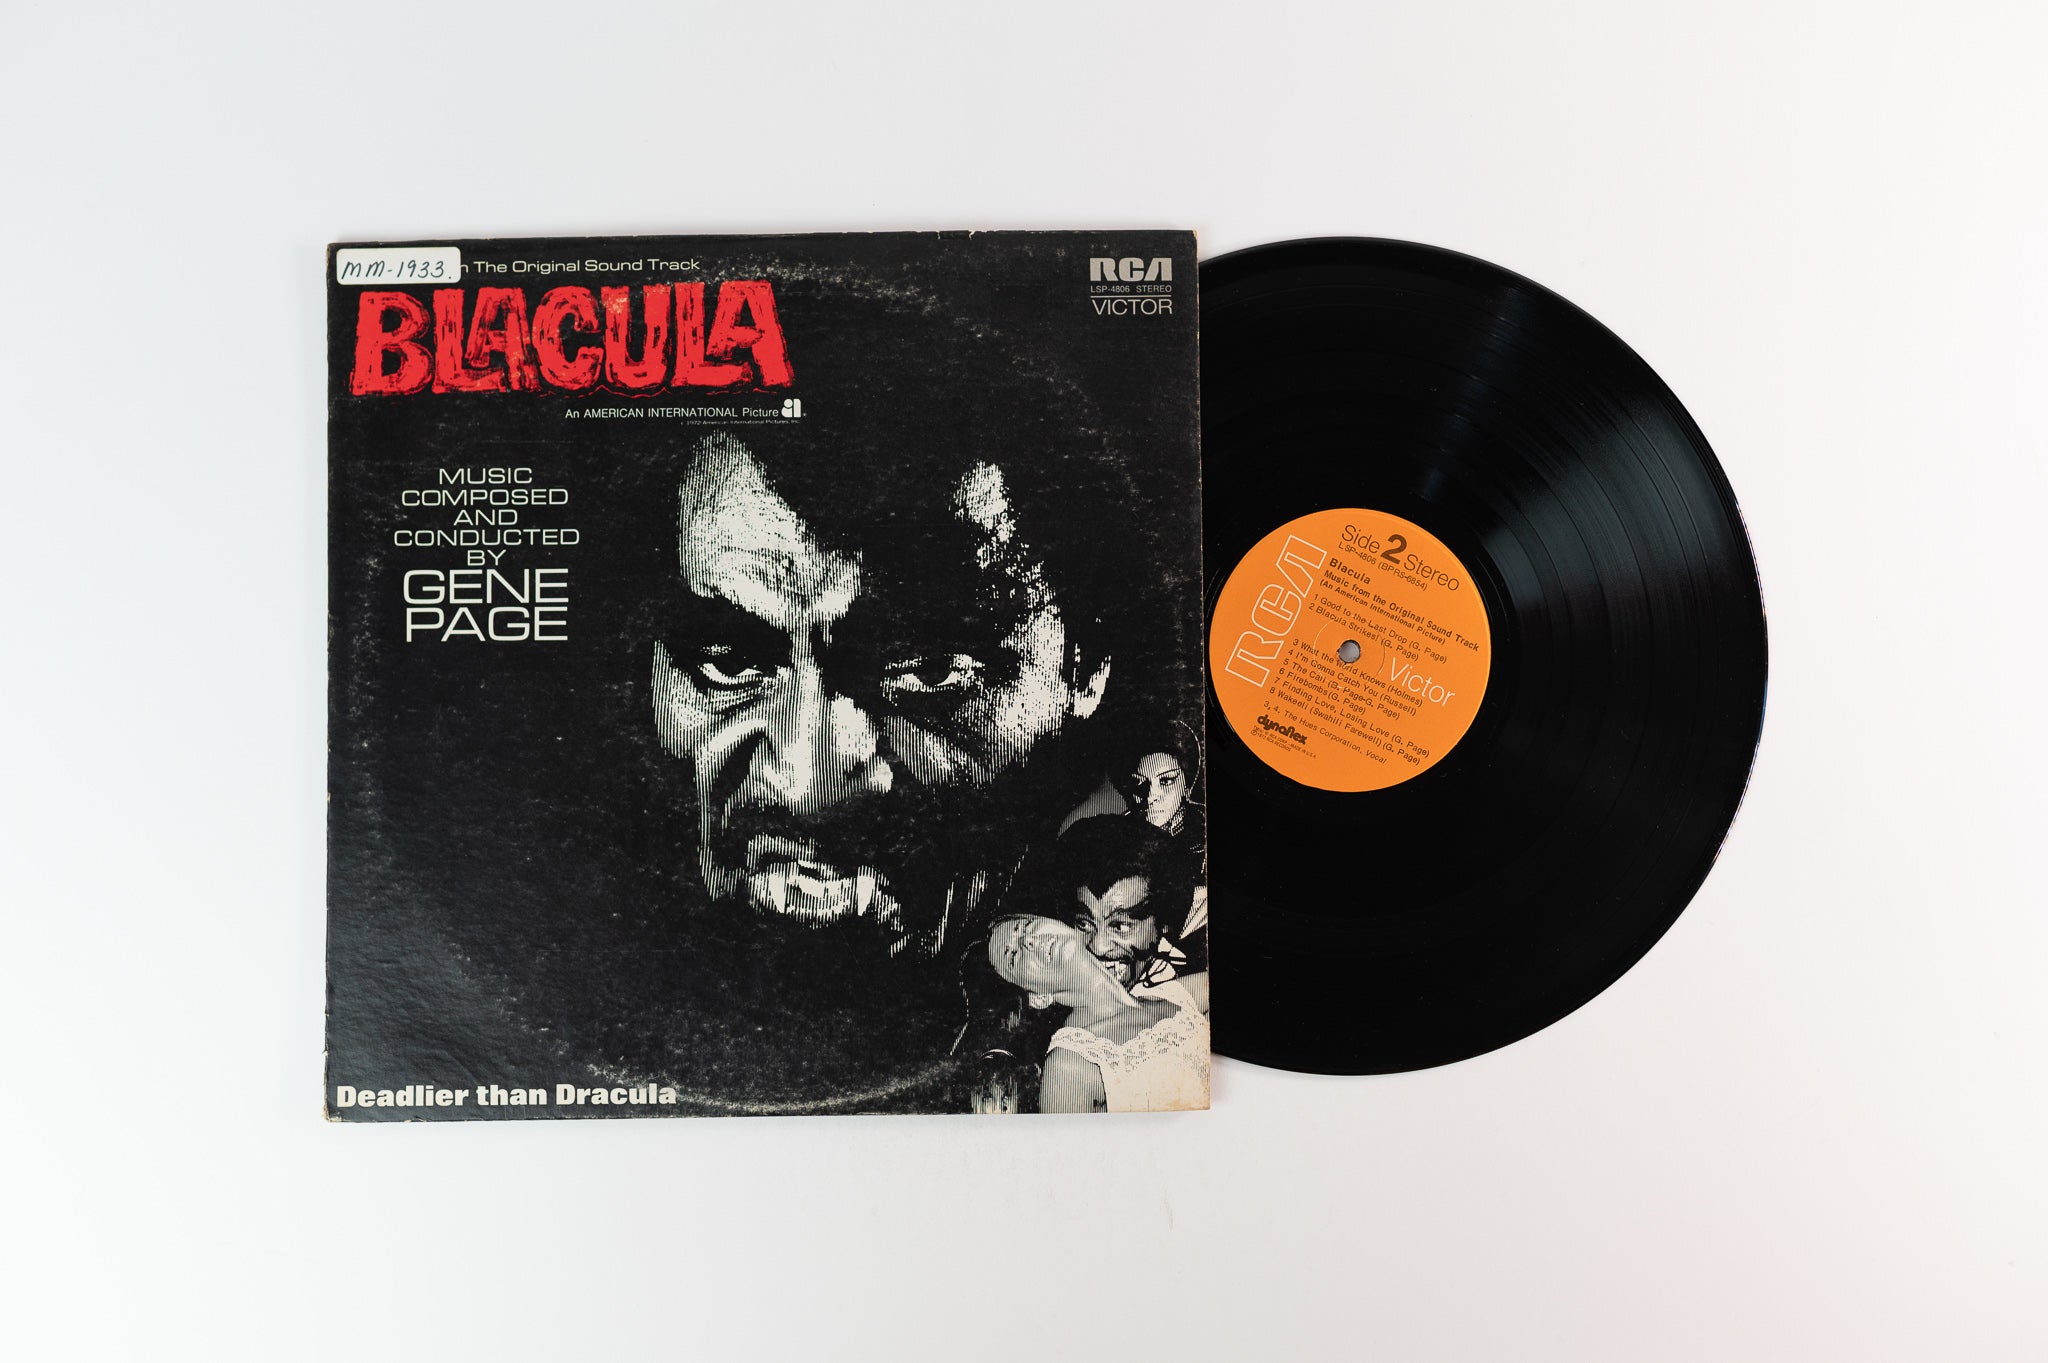 Gene Page - Blacula (Music From The Original Soundtrack) on RCA